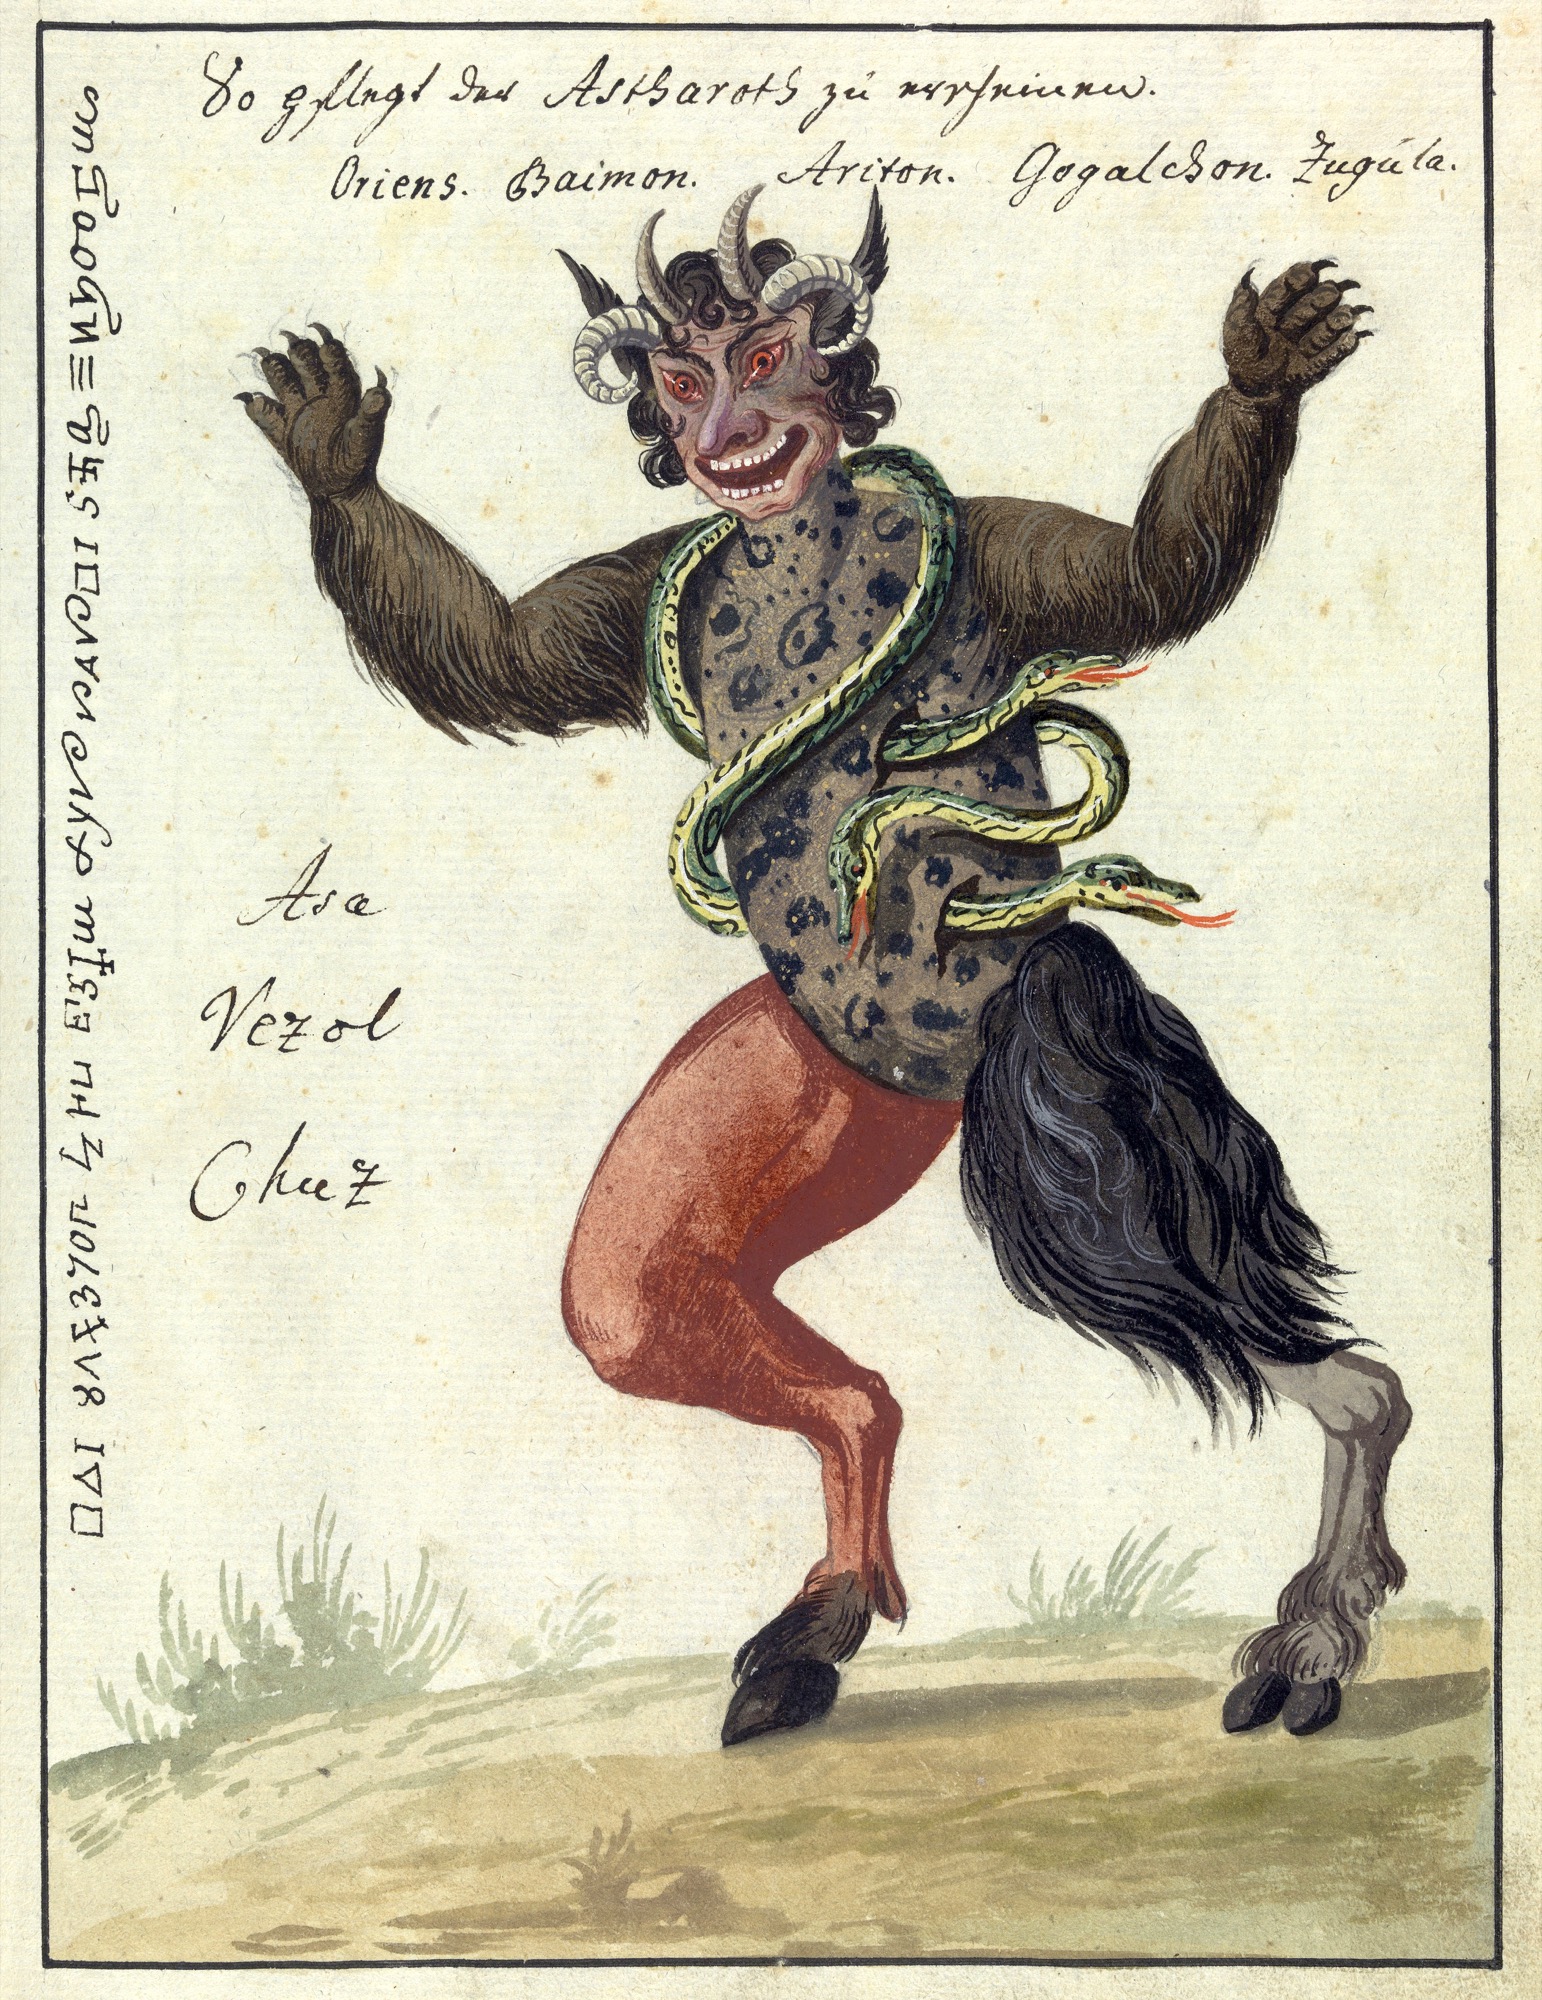 L0076360 A compendium about demons and magic. MS 1766. Credit: Wellcome Library, London. Wellcome Images images@wellcome.ac.uk http://wellcomeimages.org Compendium rarissimum totius Artis Magicae sistematisatae per celeberrimos Artis hujus Magistros. Anno 1057. Noli me tangere. Watercolour c. 1775 Published:  -  Copyrighted work available under Creative Commons Attribution only licence CC BY 4.0 http://creativecommons.org/licenses/by/4.0/